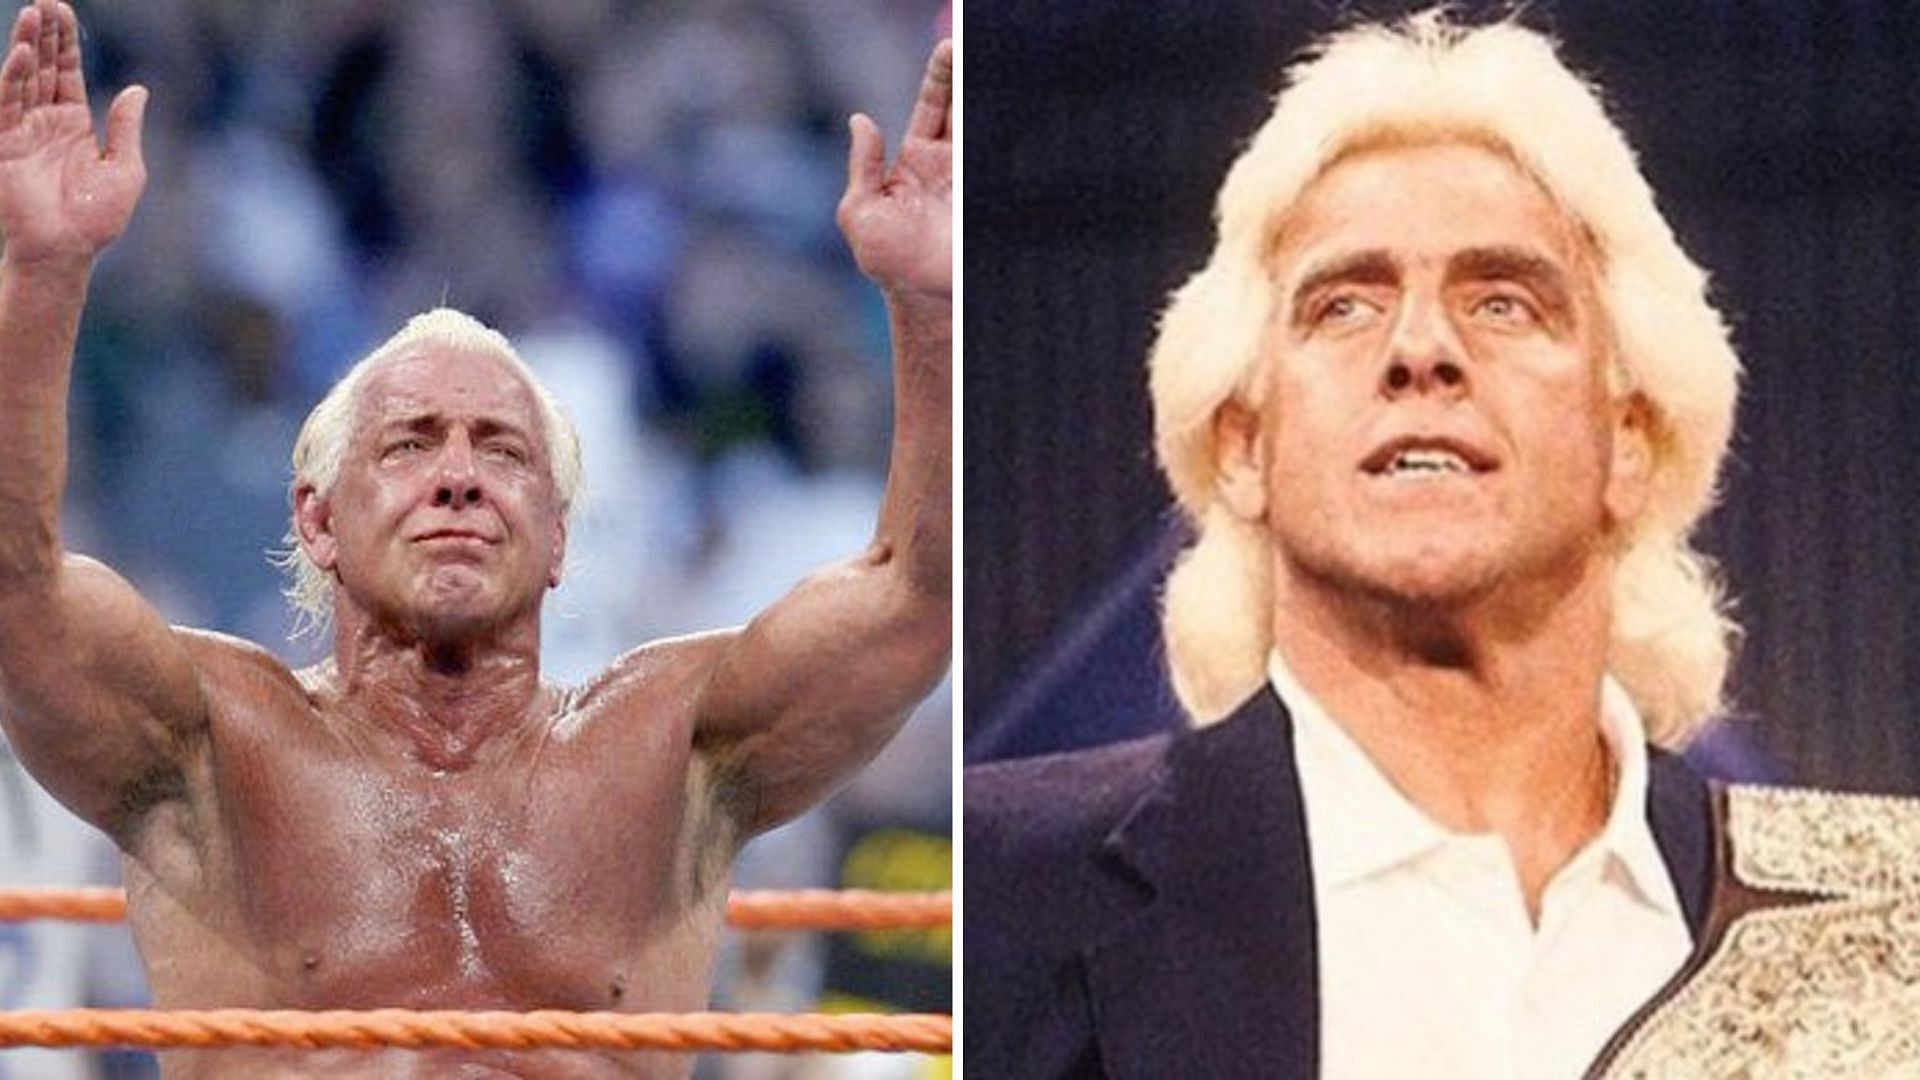 Former NWA World Champion Dory Funk Jr. recently opened up about Ric Flair